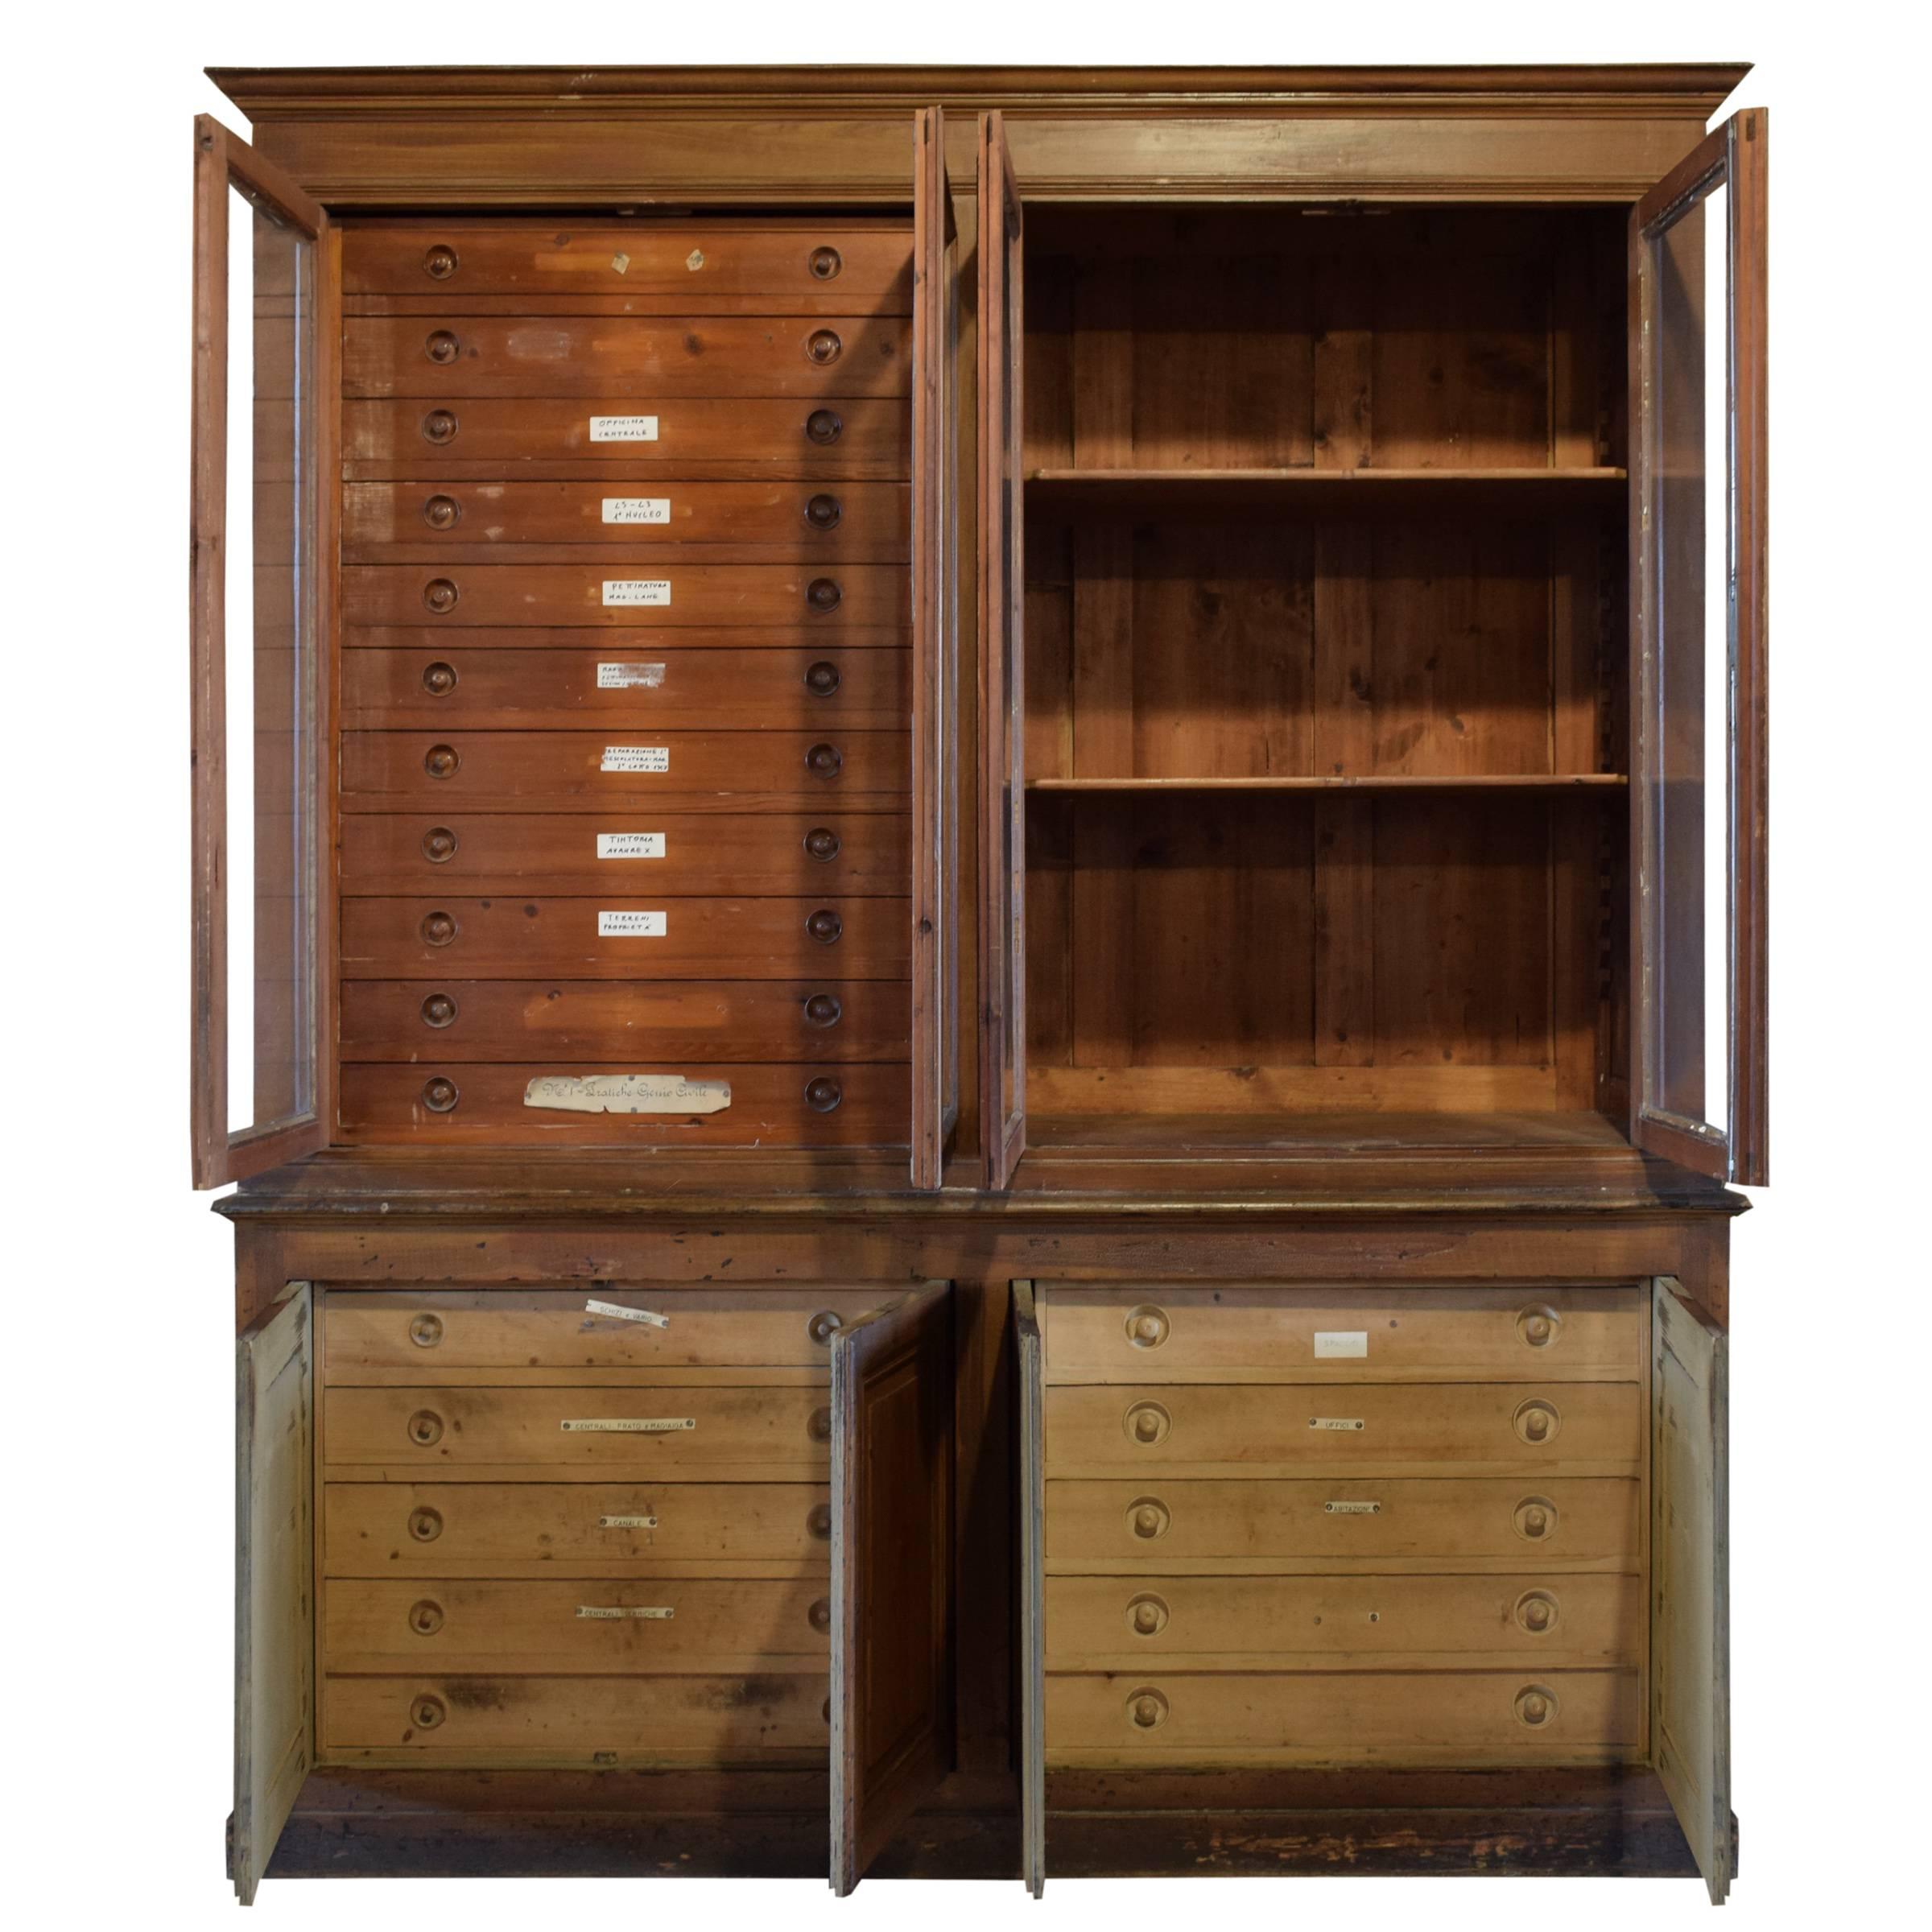 Large Italian wood specimen cabinet with original glass doors with eleven drawers and three shelves on the top and four wood doors and ten drawers on the bottom.